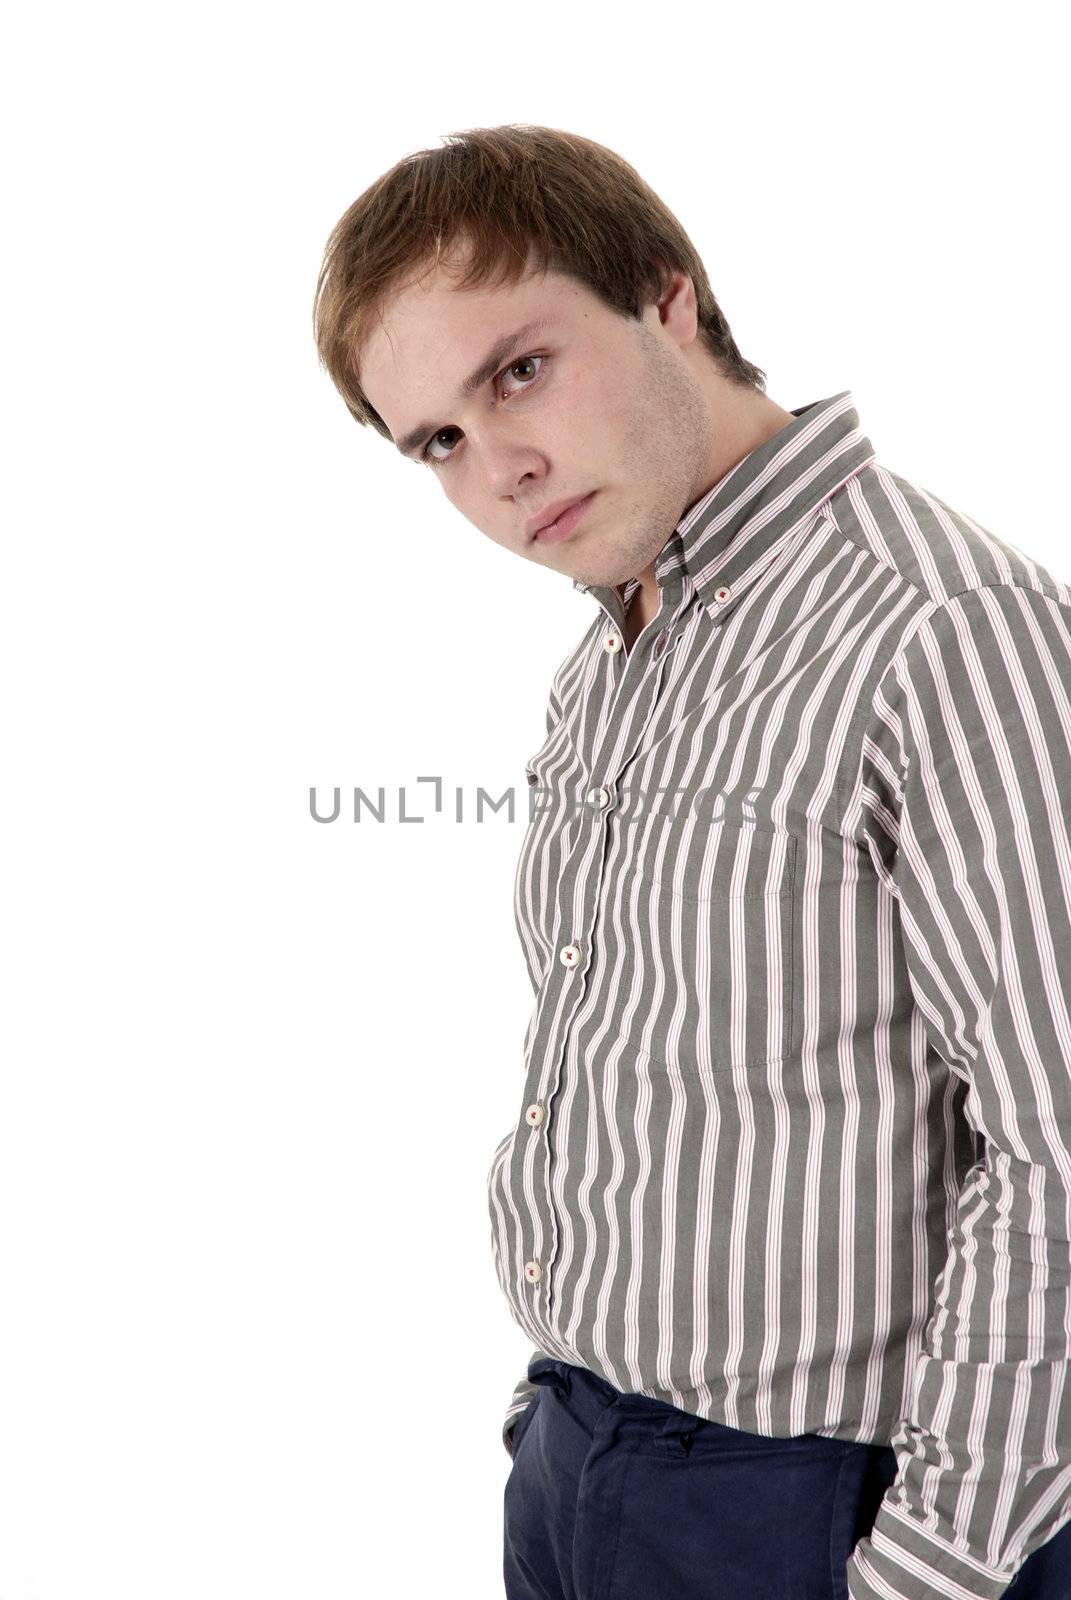 bored young man in a white background